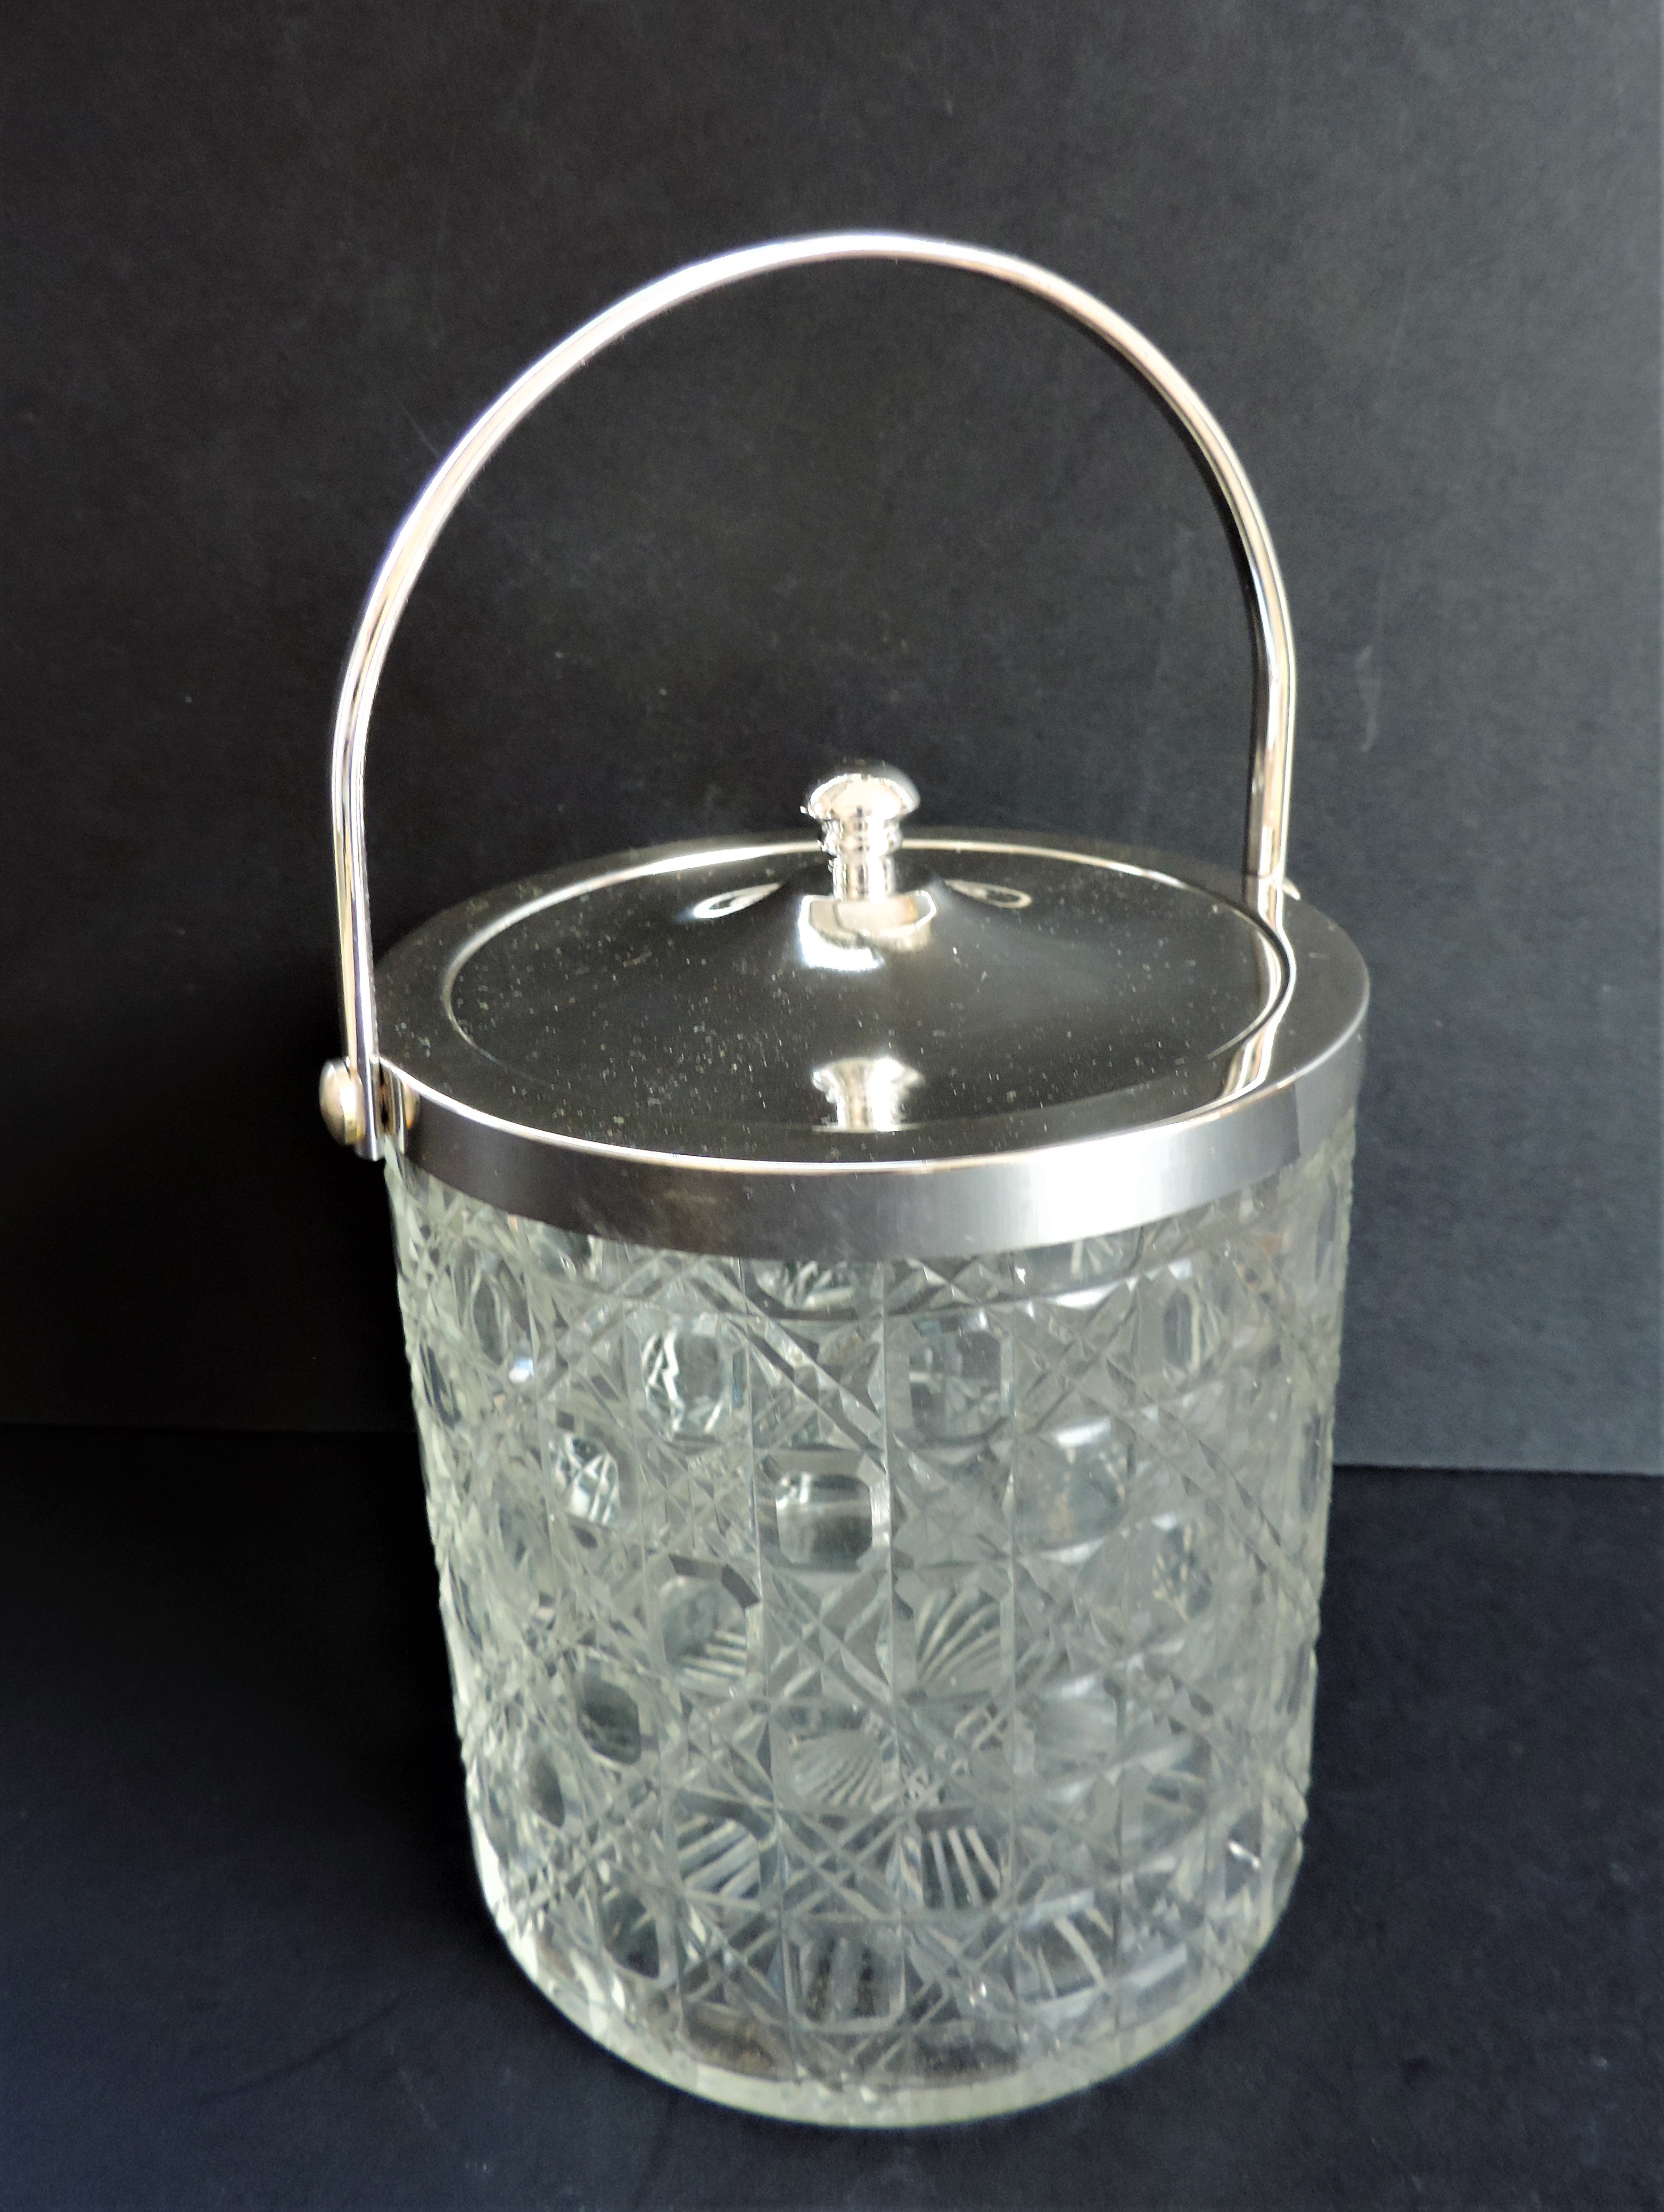 Vintage Cut Glass and Silver Plate Ice Bucket - Image 3 of 5